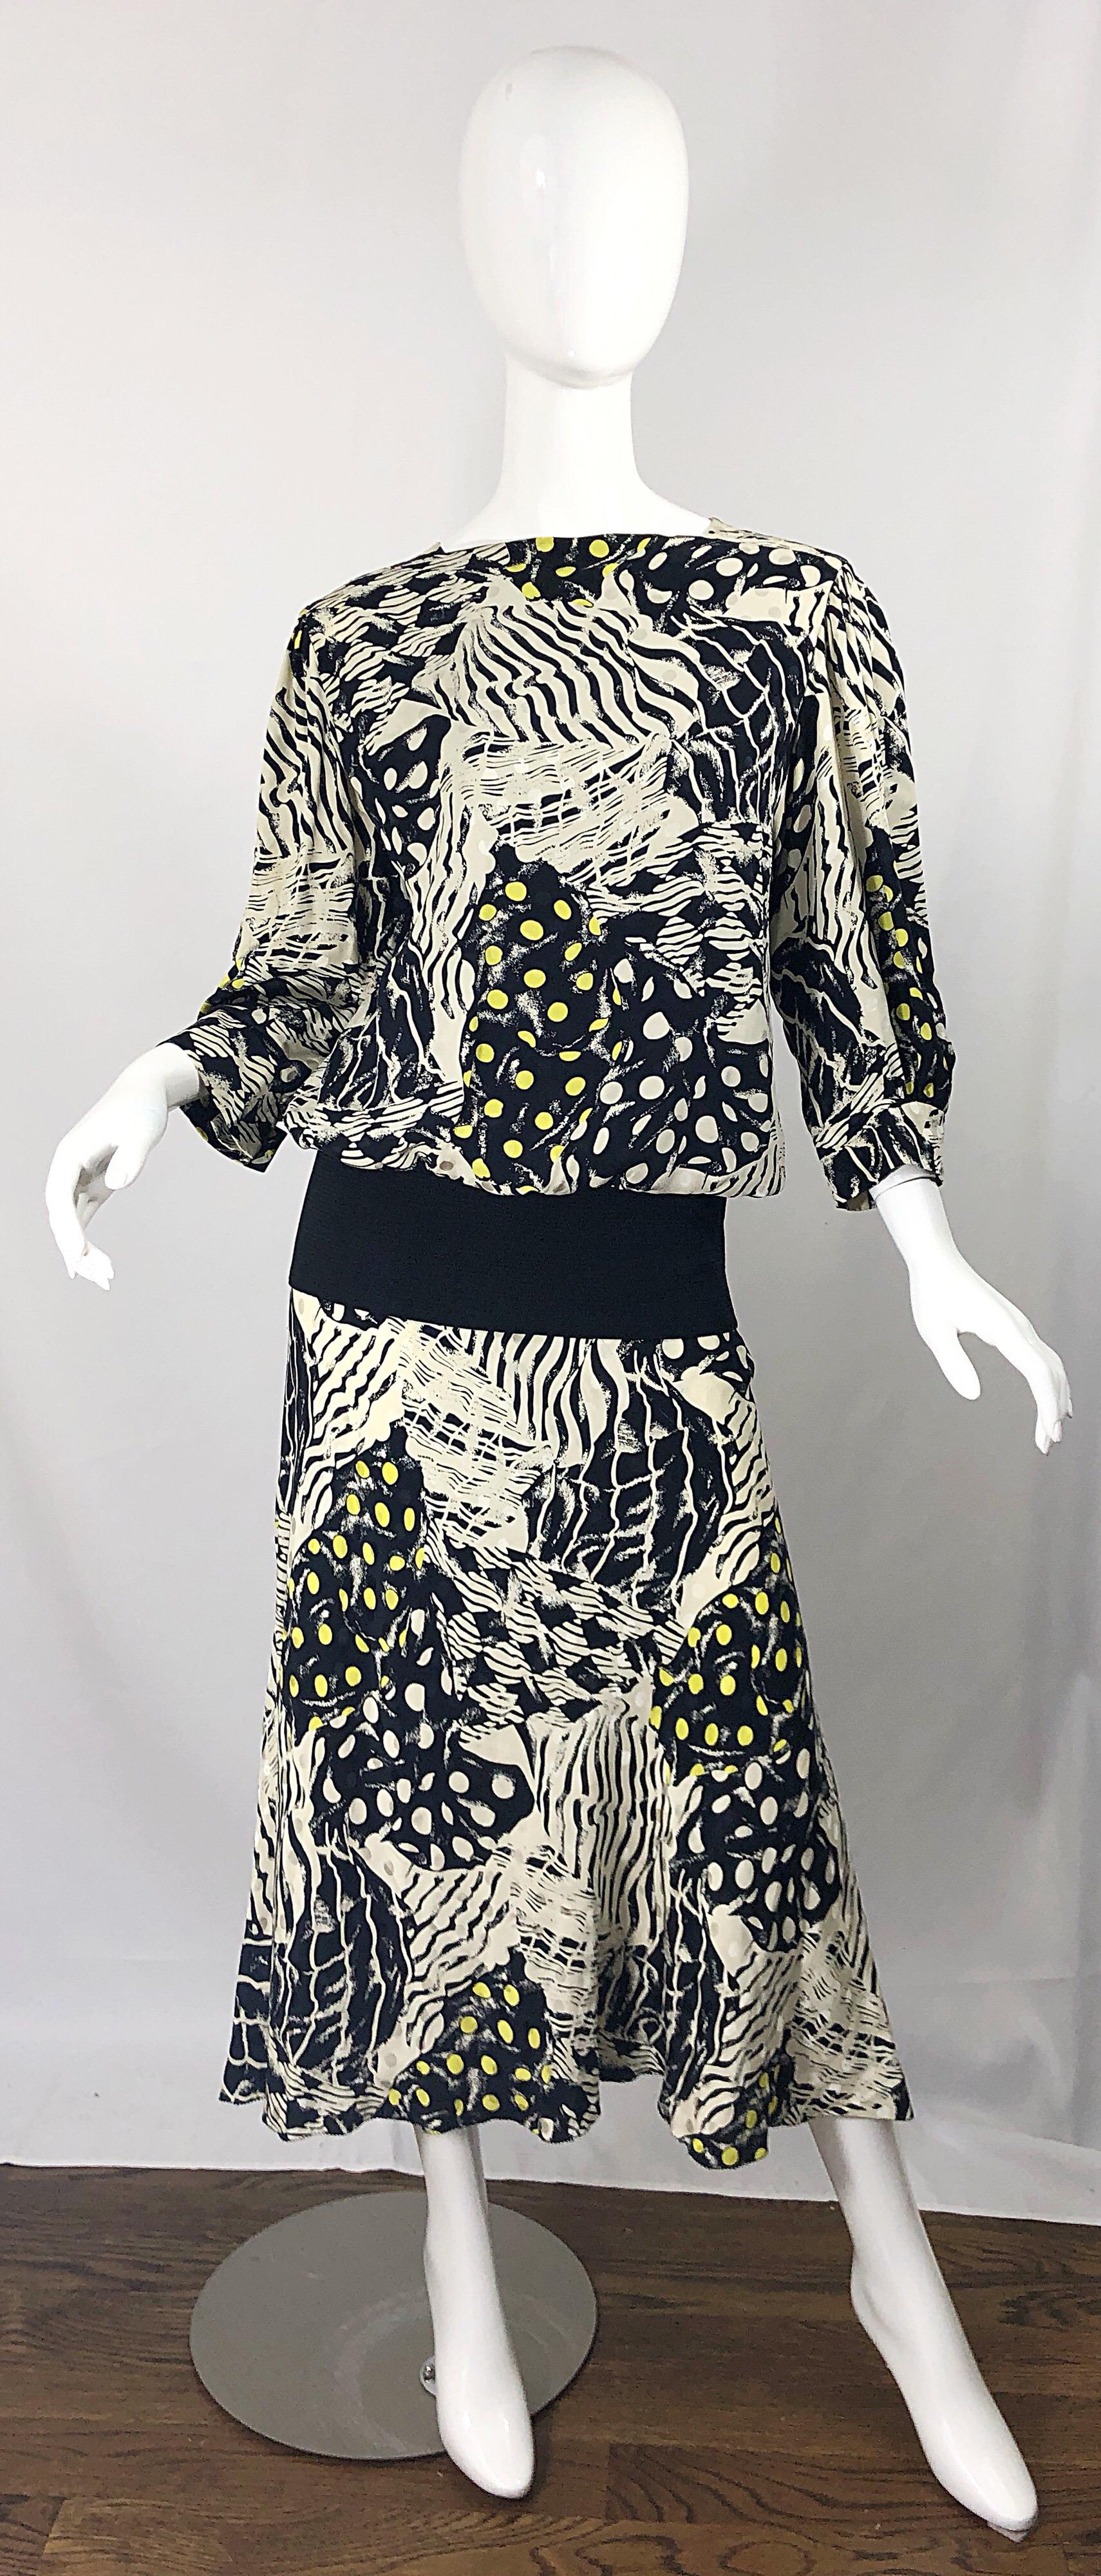 Incredible vintage 1980s NORMA WALTERS black, white and yellow abstract drop waist silk maxi dress! Features a billow fit dolman sleeve blosue, with elastic waistband and flirt full skirt. Buttons up the back. Super flattering dress that can work